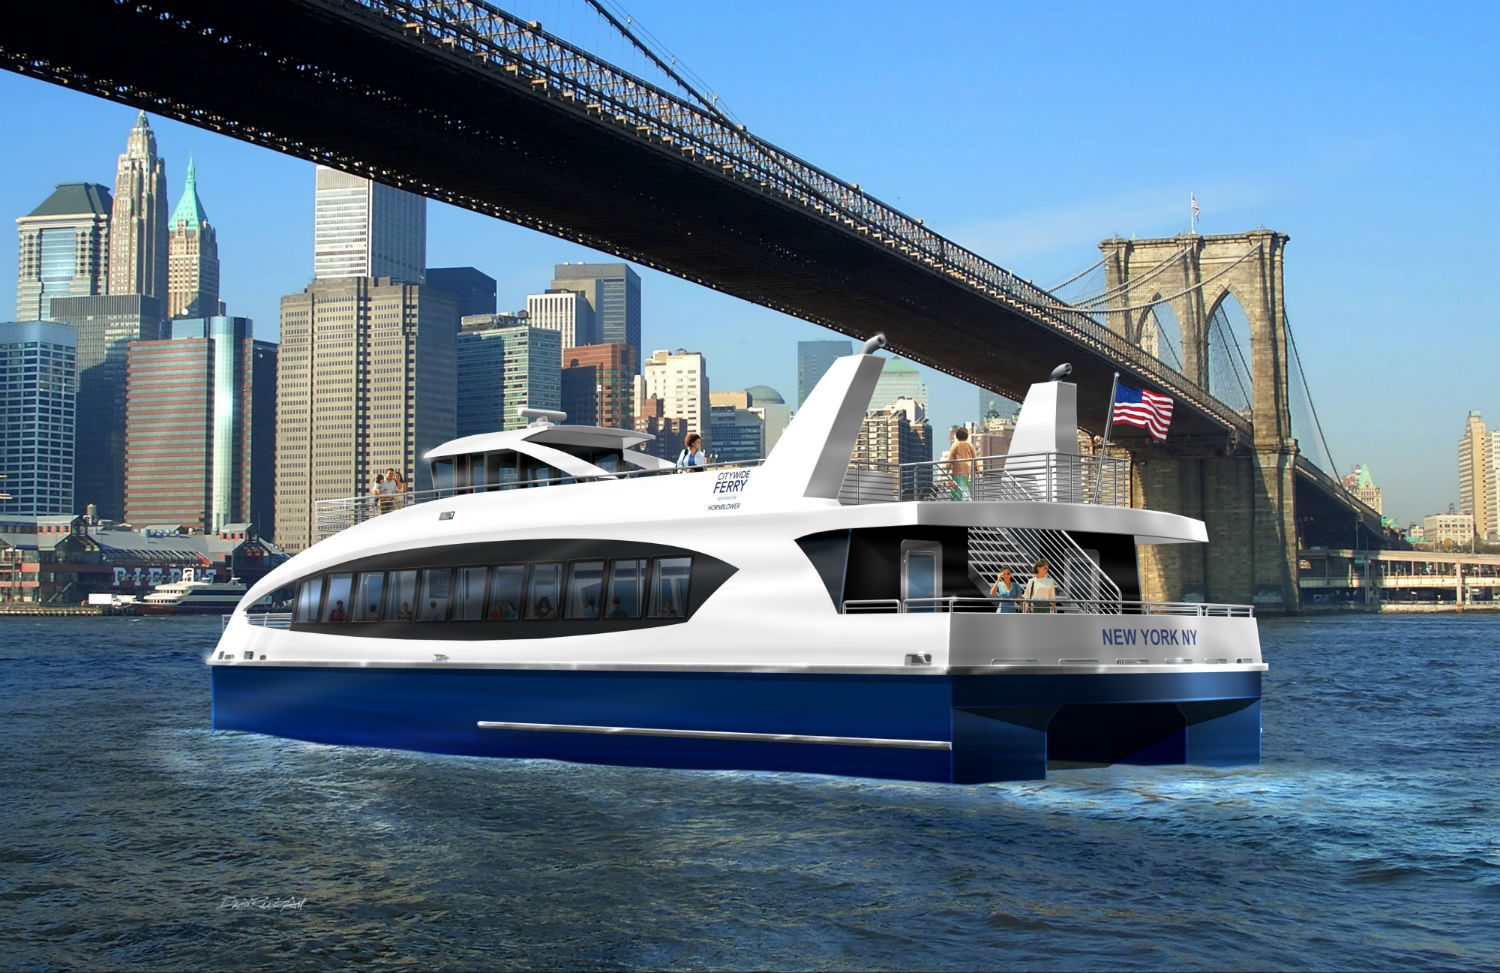 NYC ferry expansion to launch summer 2017, connecting 